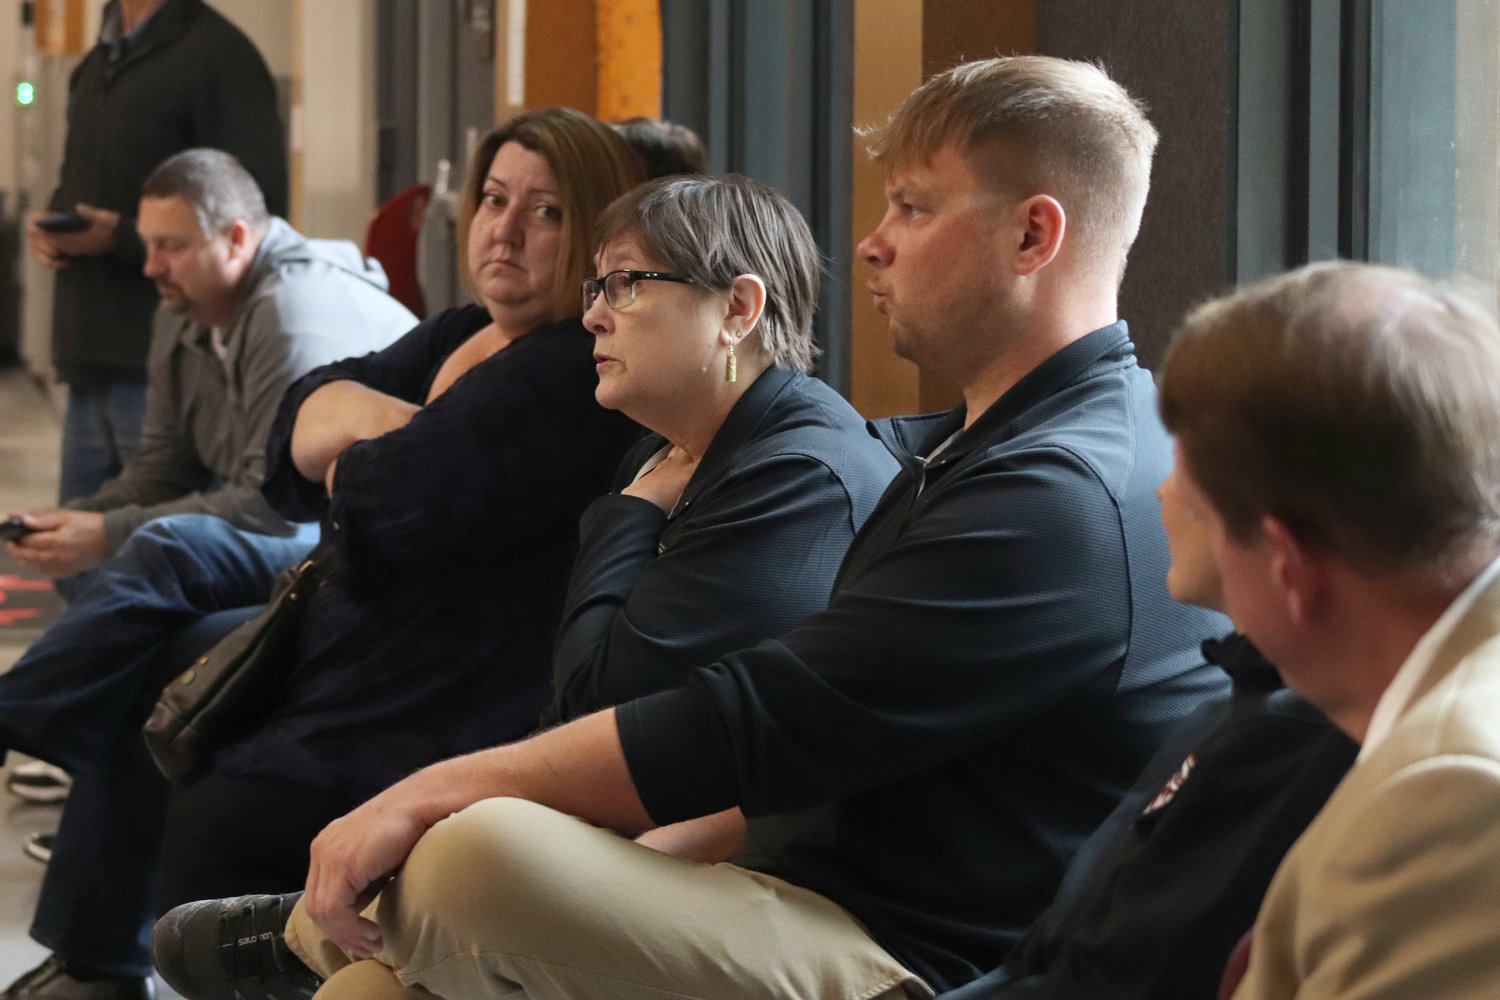 Toledo School Board Vice Chair Heidi Buswell answers questions during a community meeting at Toledo High School on Tuesday.